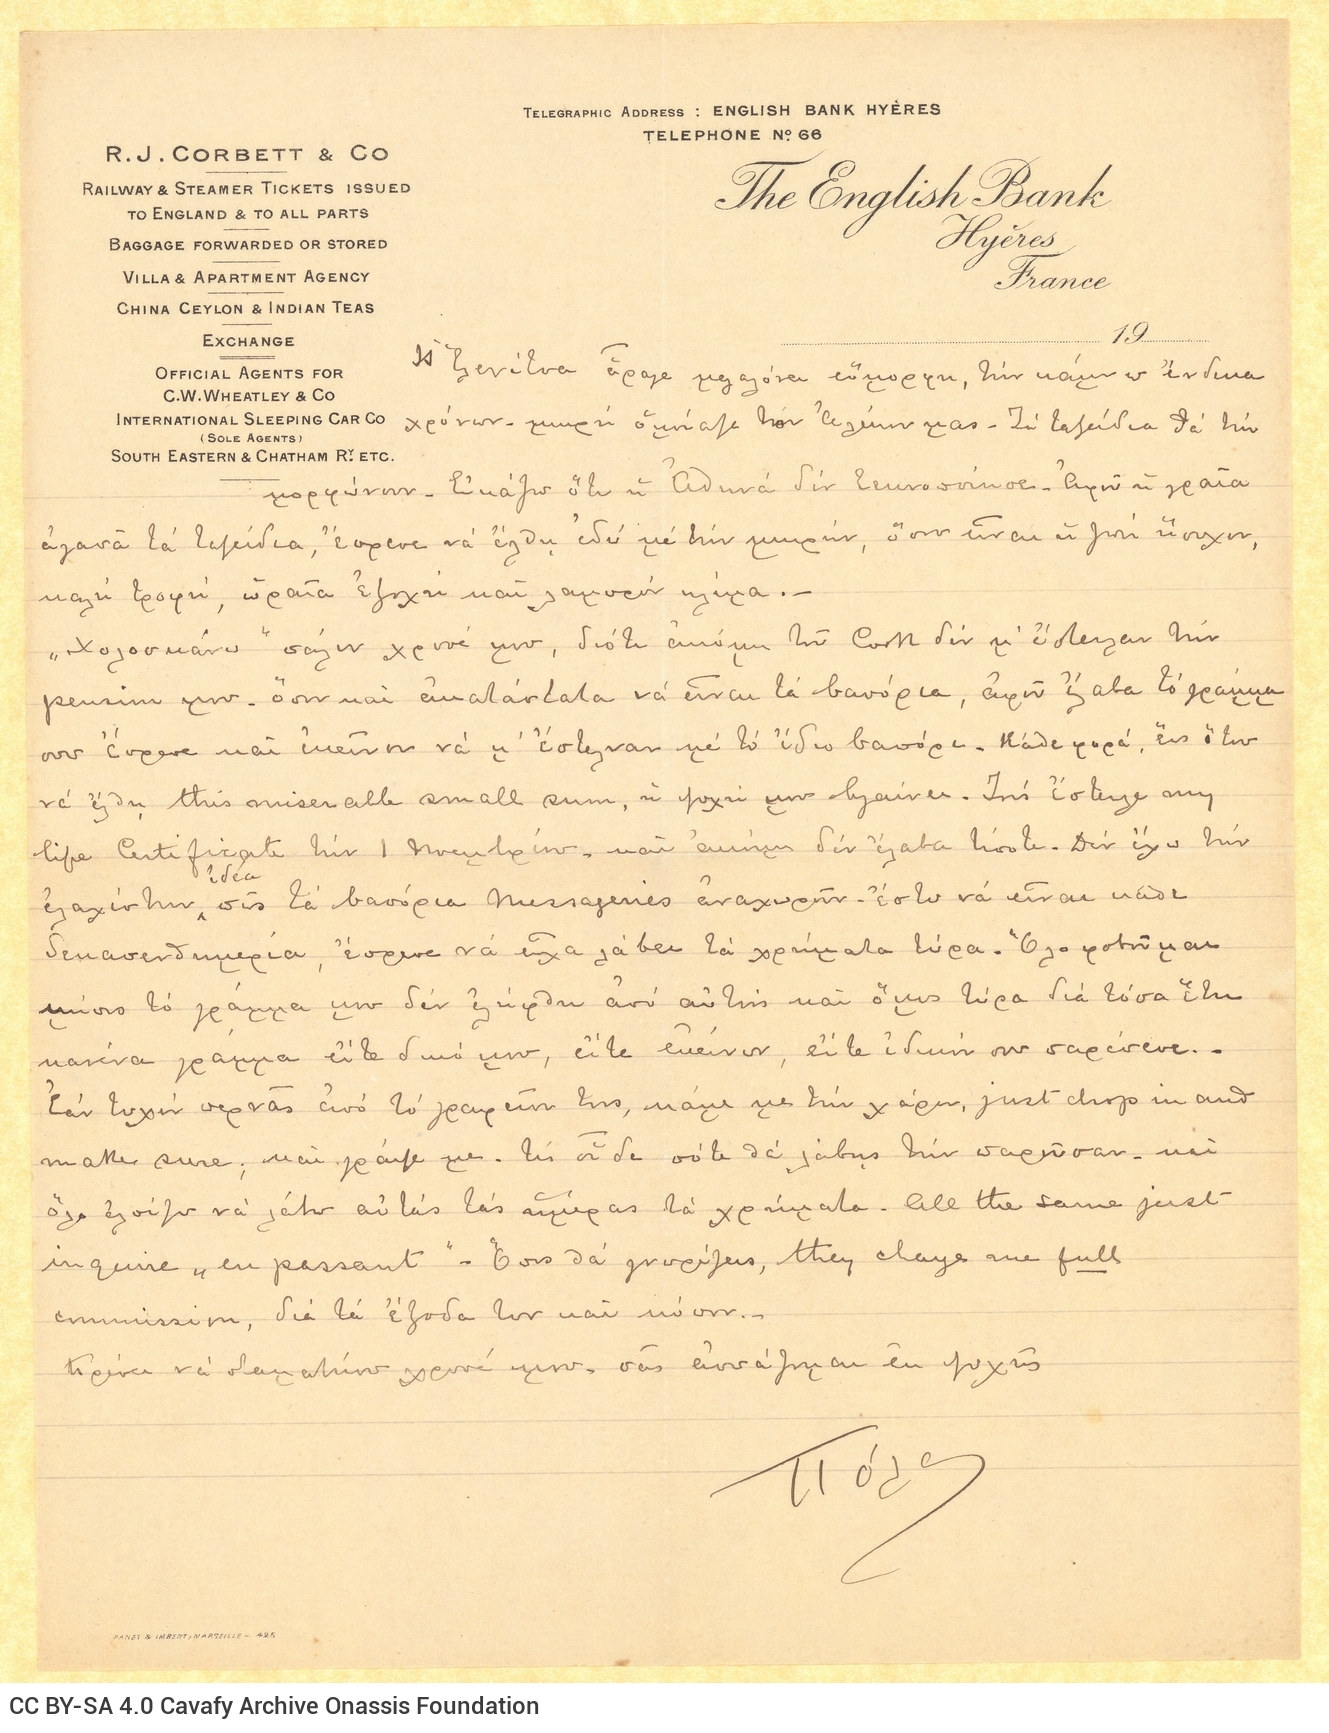 Handwritten letter by Paul Cavafy to C. P. Cavafy from Hyères, France, according to the letterhead, on two sheets, to the re